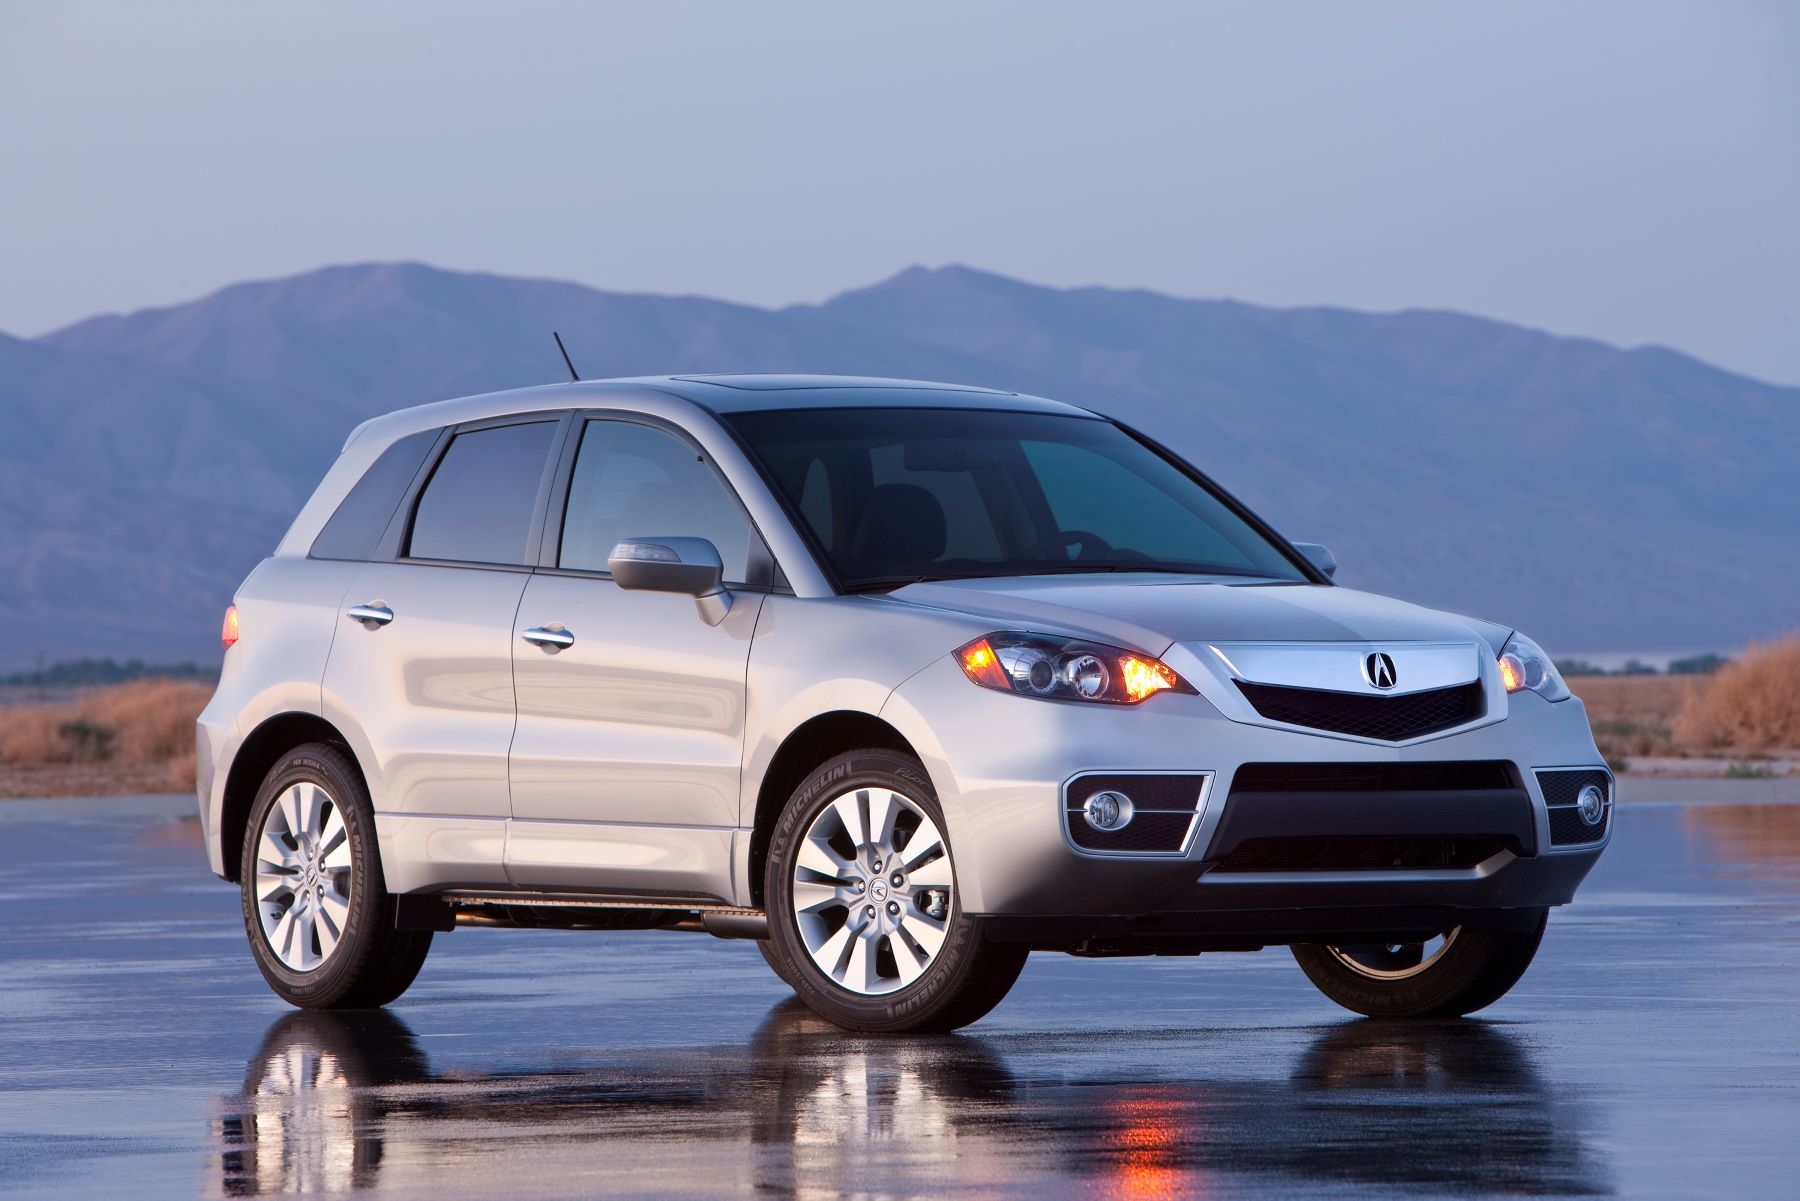 A silver-gray 2010 Acura RDX compact luxury crossover SUV model parked on a wet asphalt lot